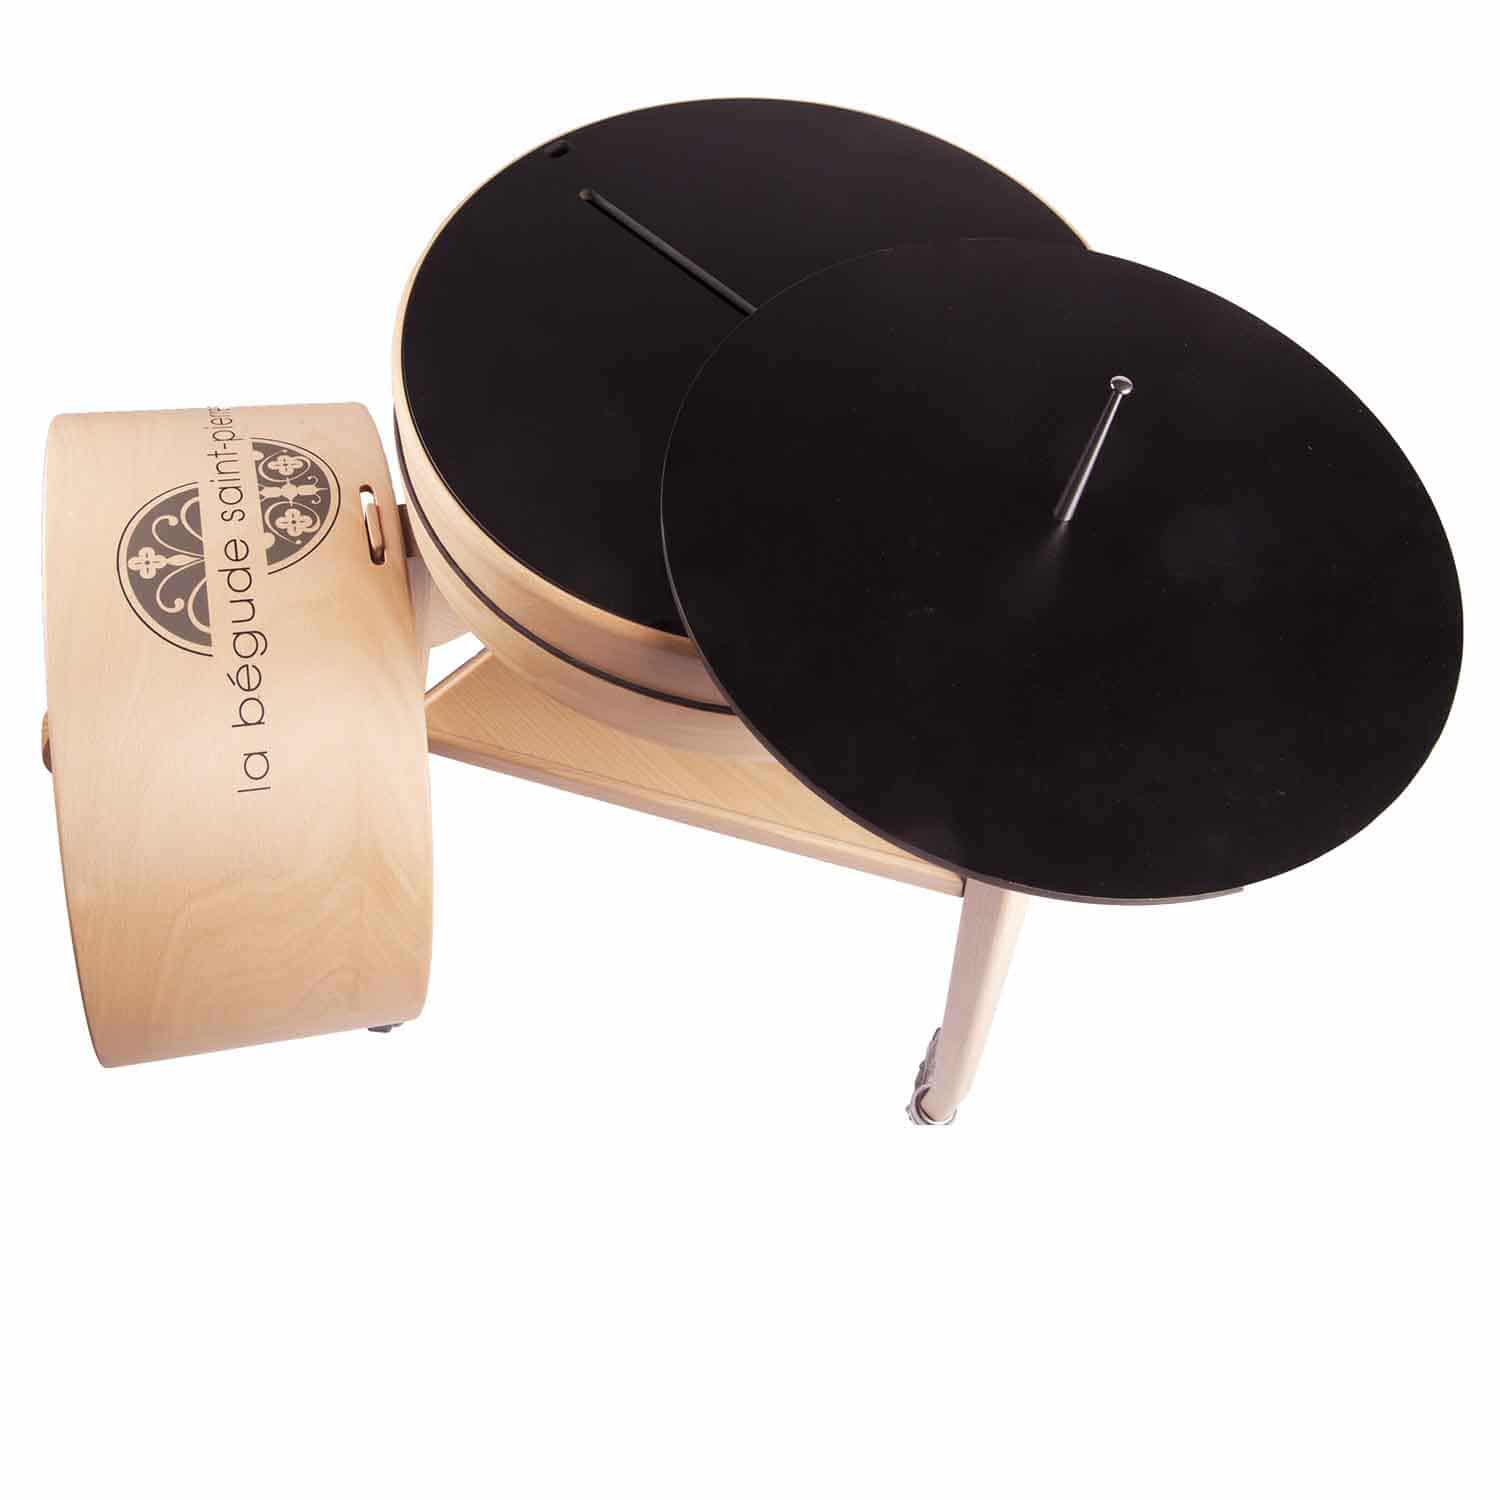 QUISO cheese trolley, clear base, black cap personalised with the logo of the restaurant Le Bouillon in La Rochelle, 2021